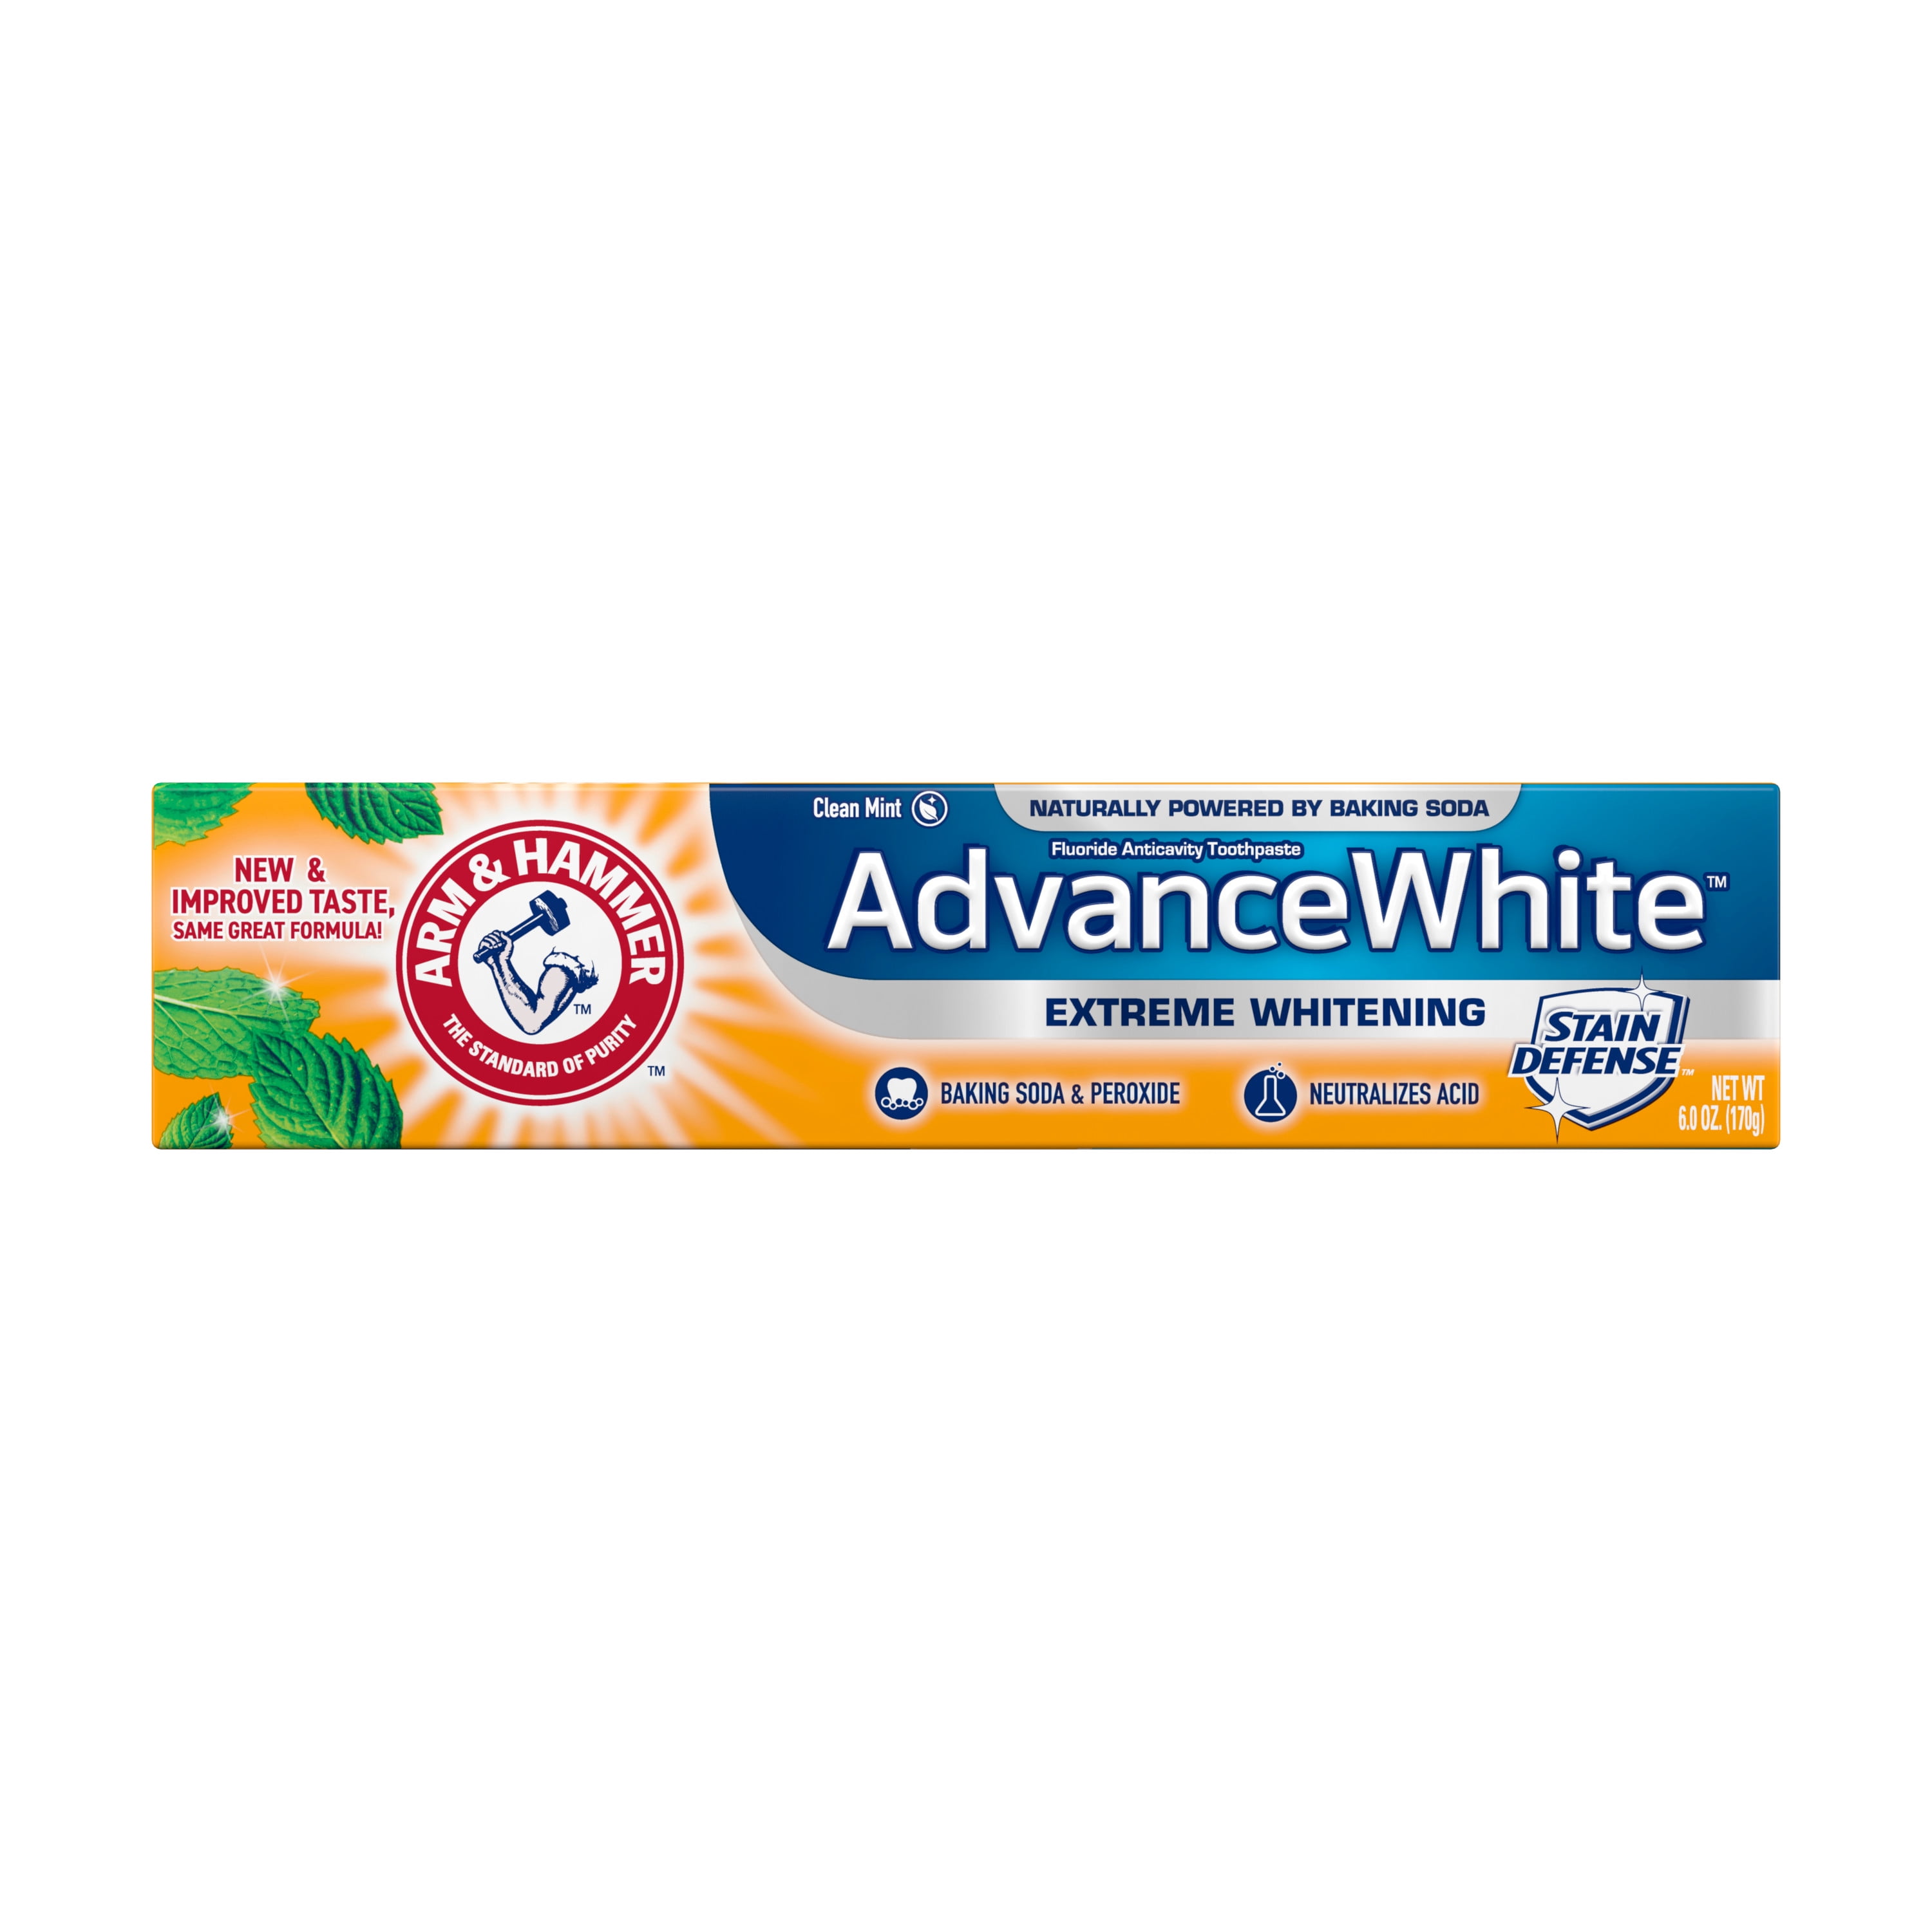 ARM & HAMMER Advanced White Extreme Whitening Toothpaste Clean Mint Fluoride Toothpaste